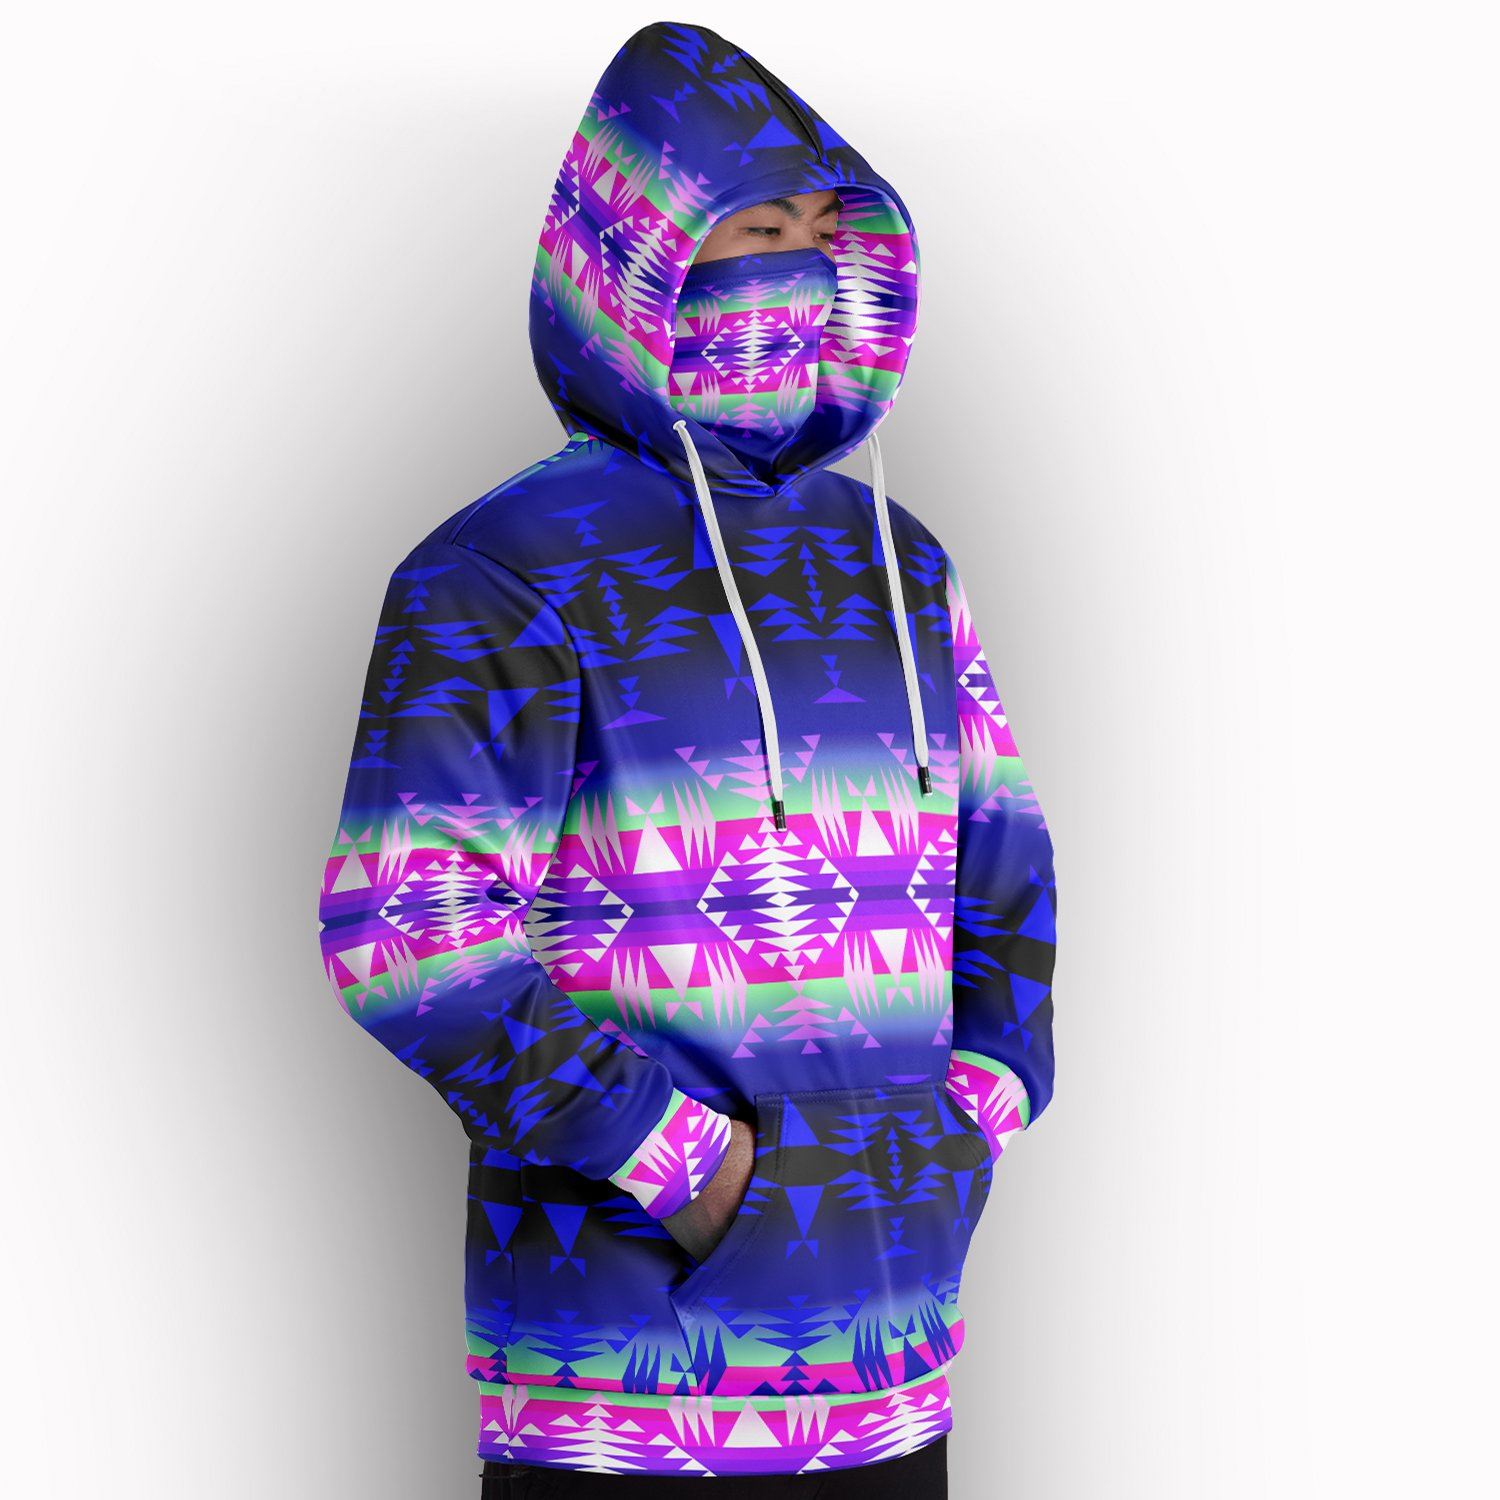 Between the Wasatch Mountains Hoodie with Face Cover 49 Dzine 